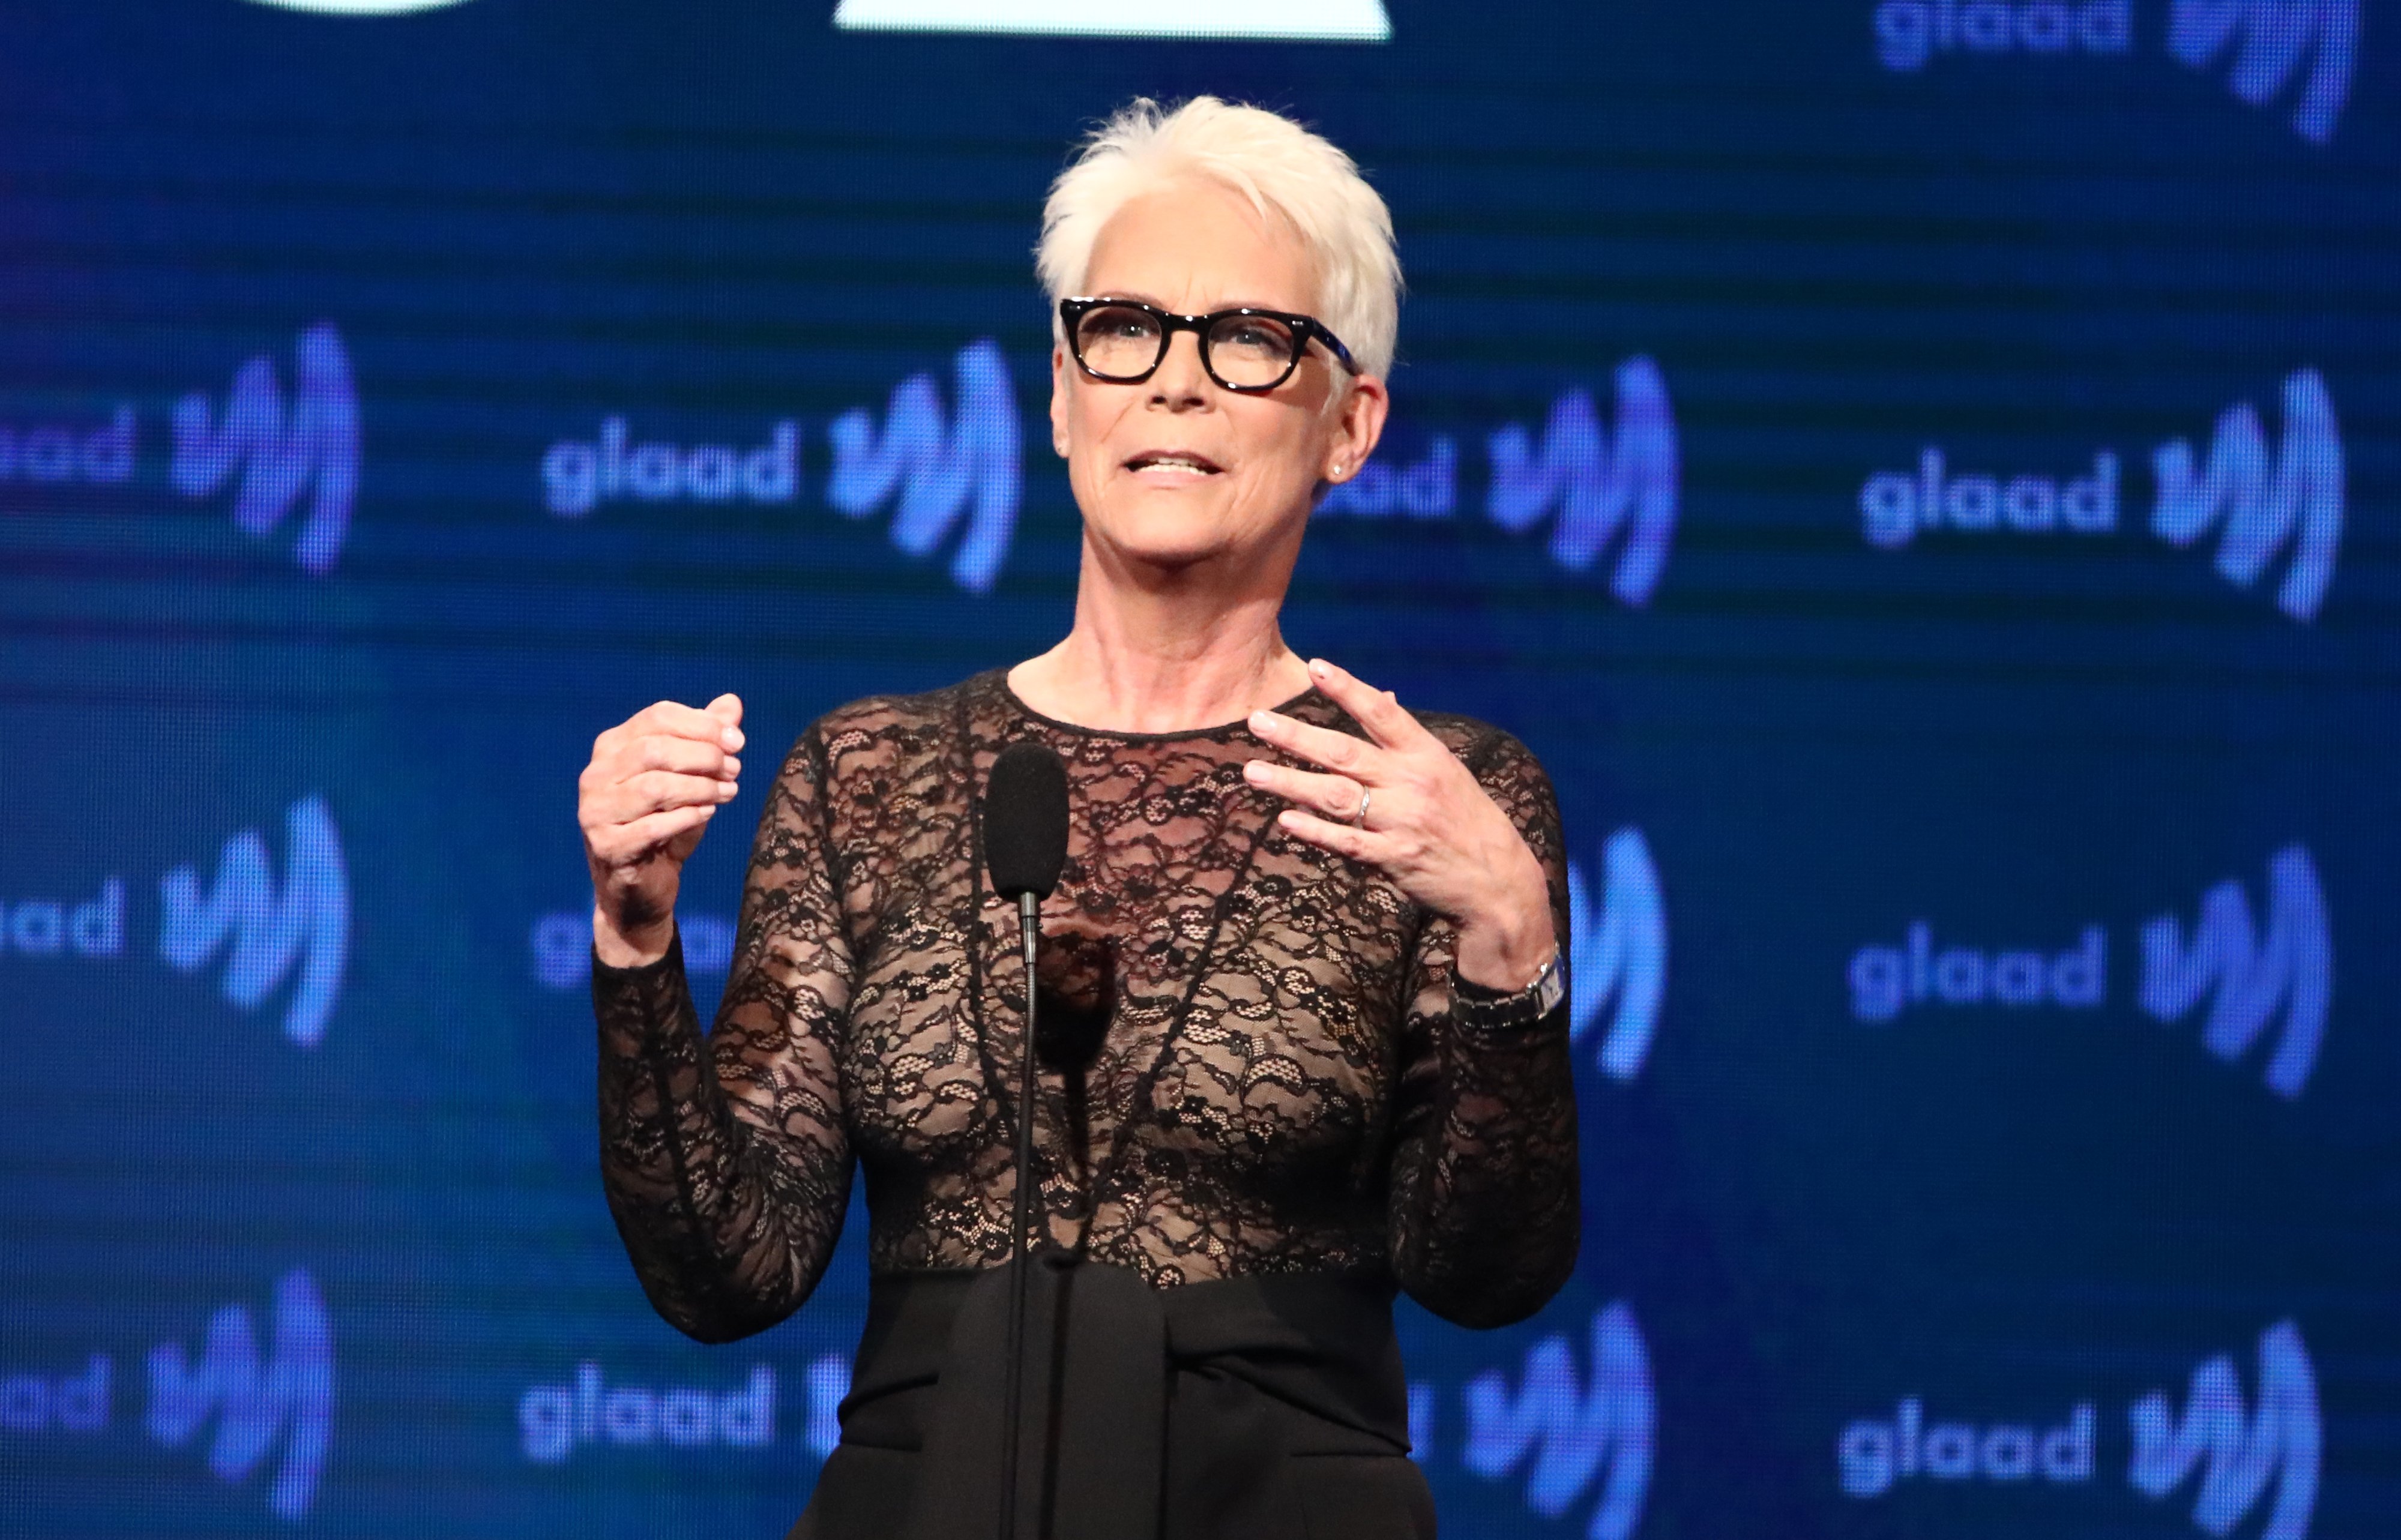 Jamie Lee Curtis speaks onstage during the 30th Annual GLAAD Media Awards Los Angeles at The Beverly Hilton Hotel on March 28, 2019. | Photo: Getty Images